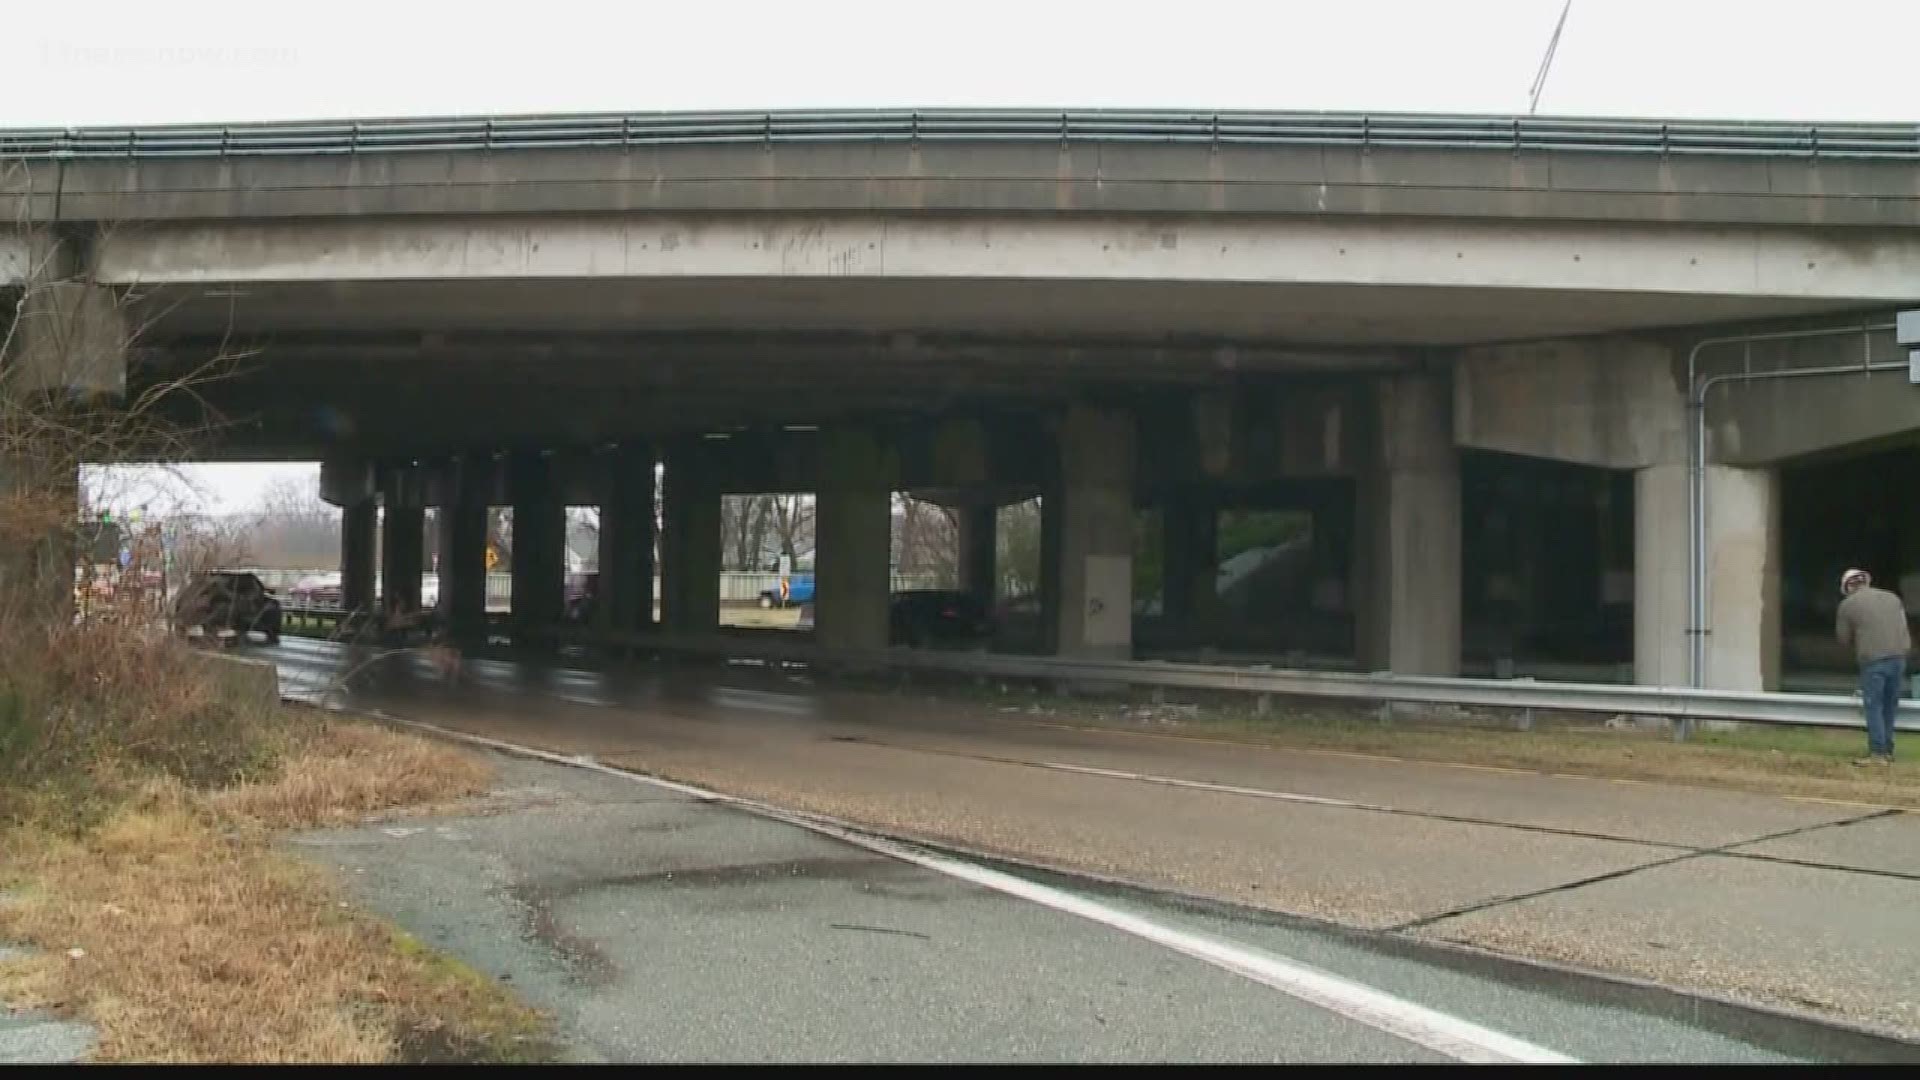 VDOT crews noticed parts of I-64 with falling concrete and now have to make emergency repairs.